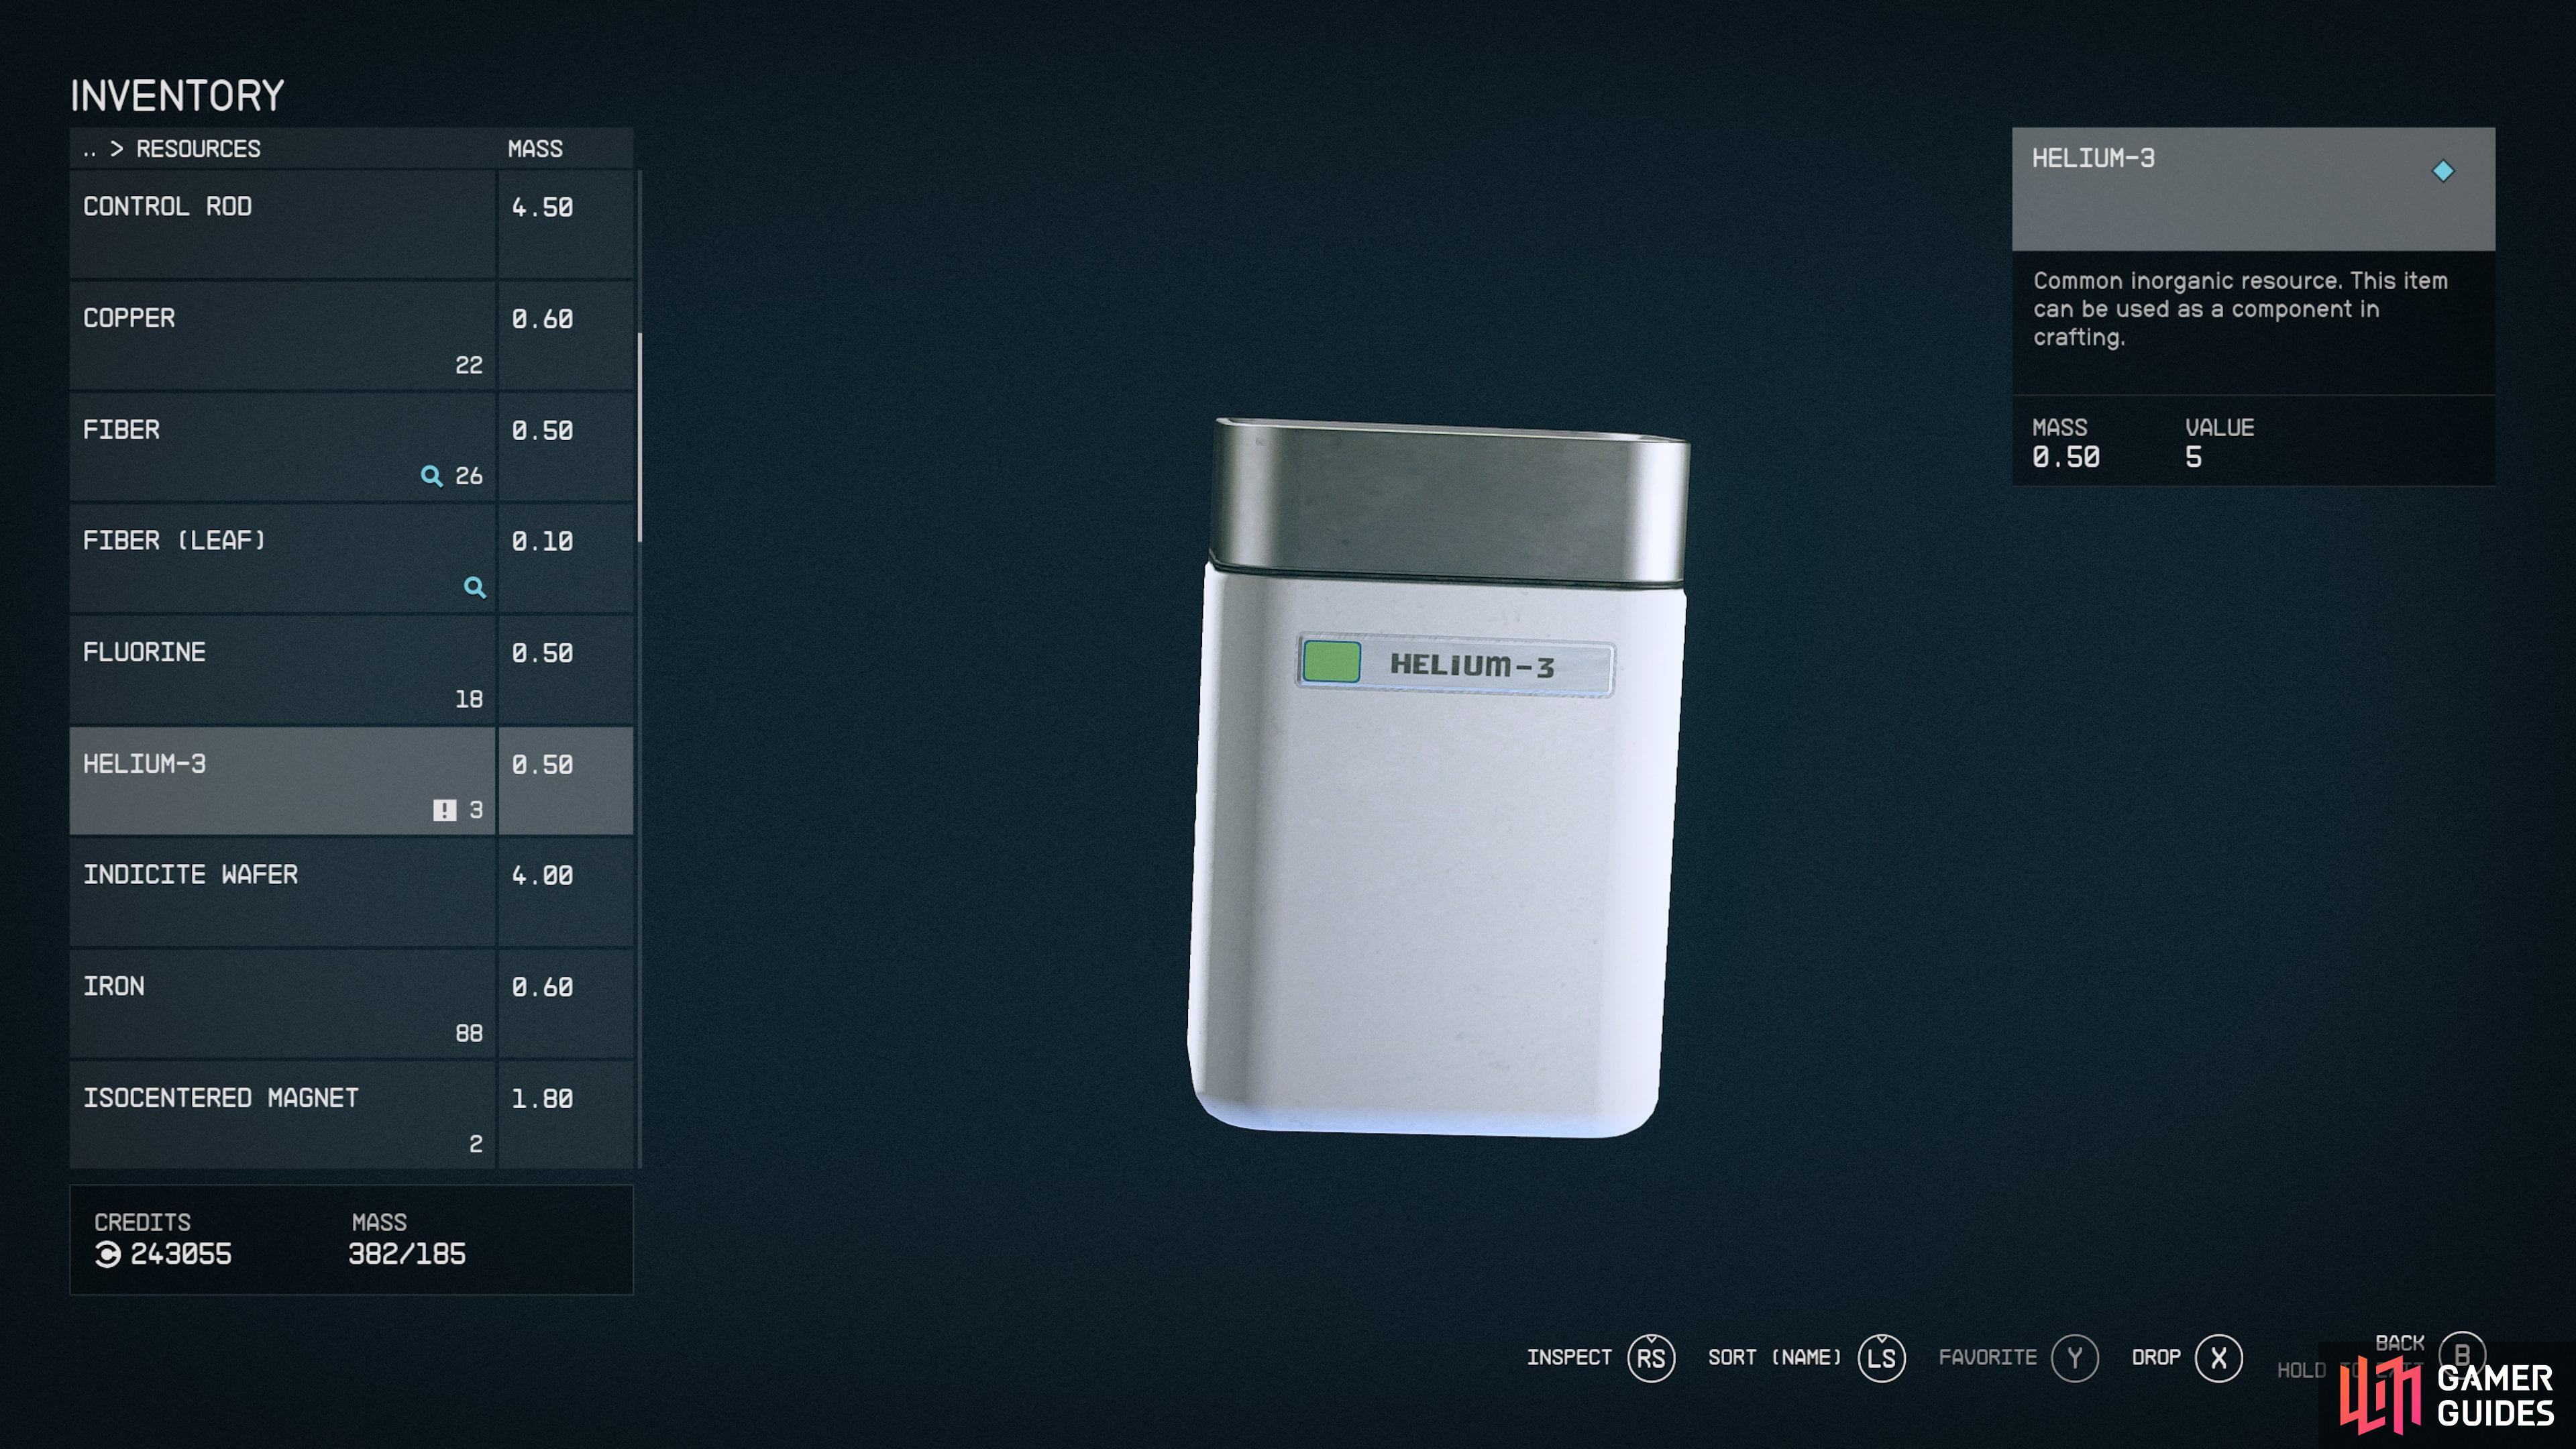 Helium-3 will be kept inside a container in your inventory.